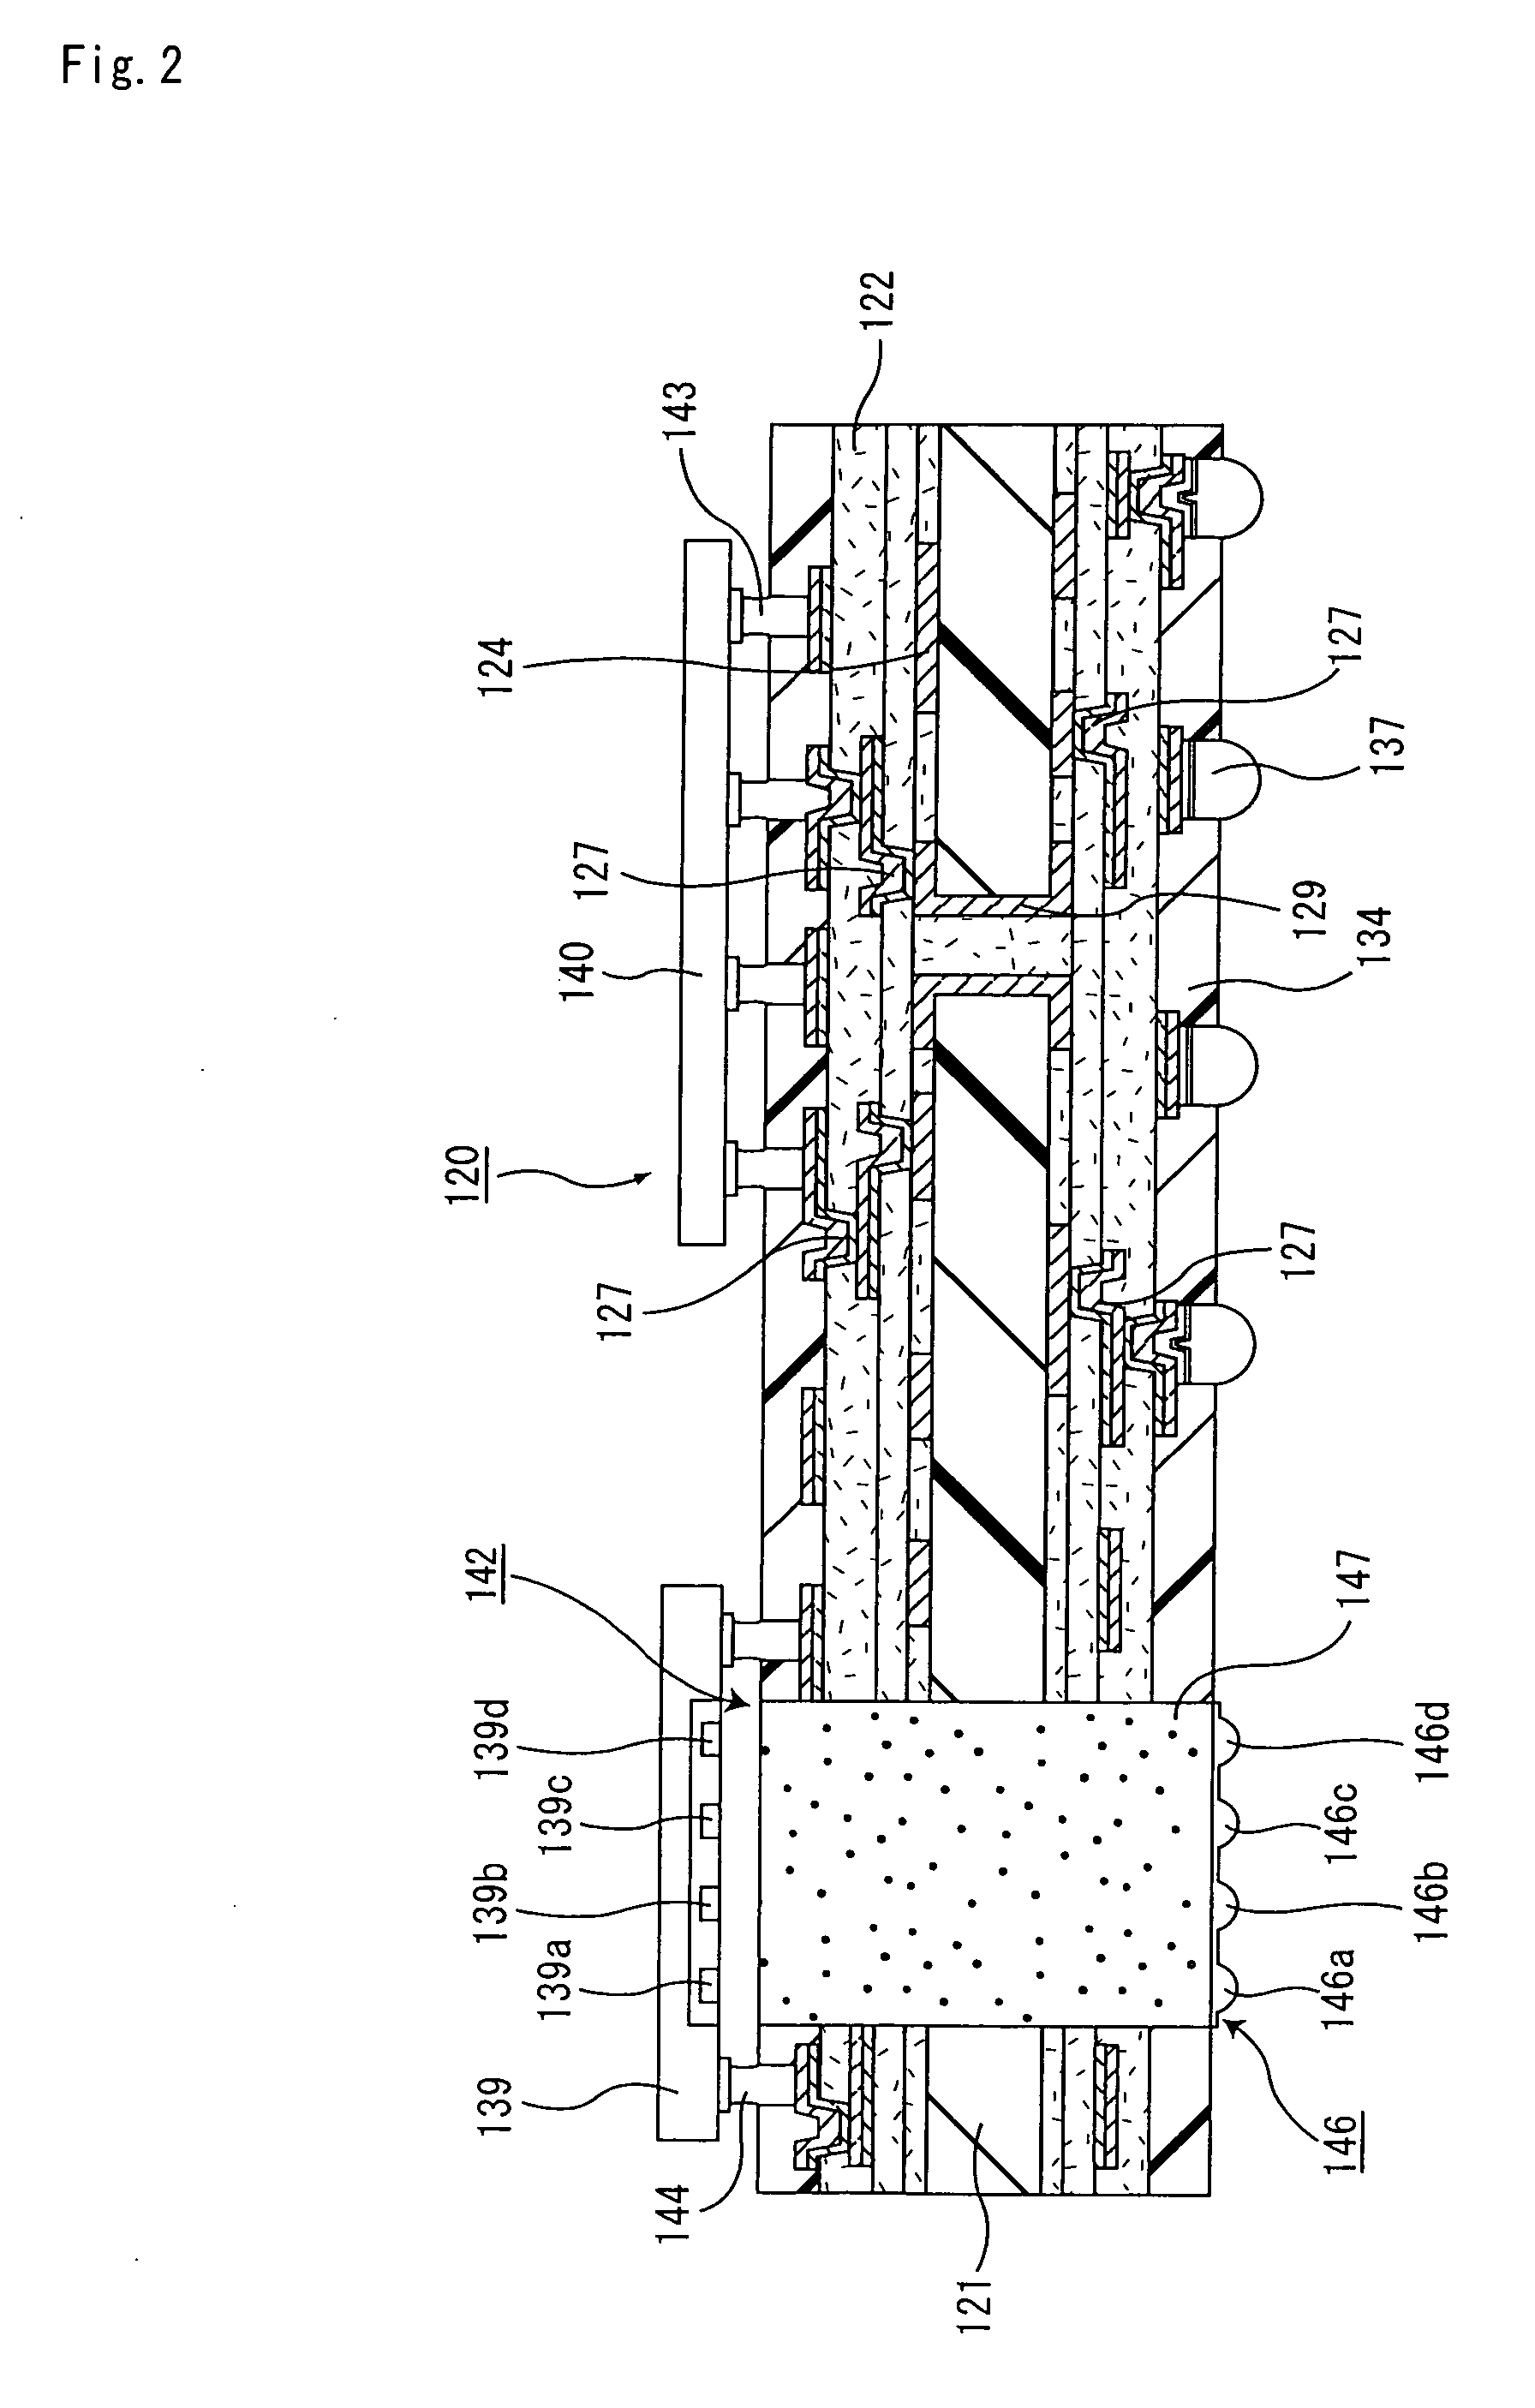 Substrate for mounting IC chip, substrate for motherboard, device for optical communication, manufacturing method of substrate for mounting IC chip, and manufacturing method of substrate for motherboard